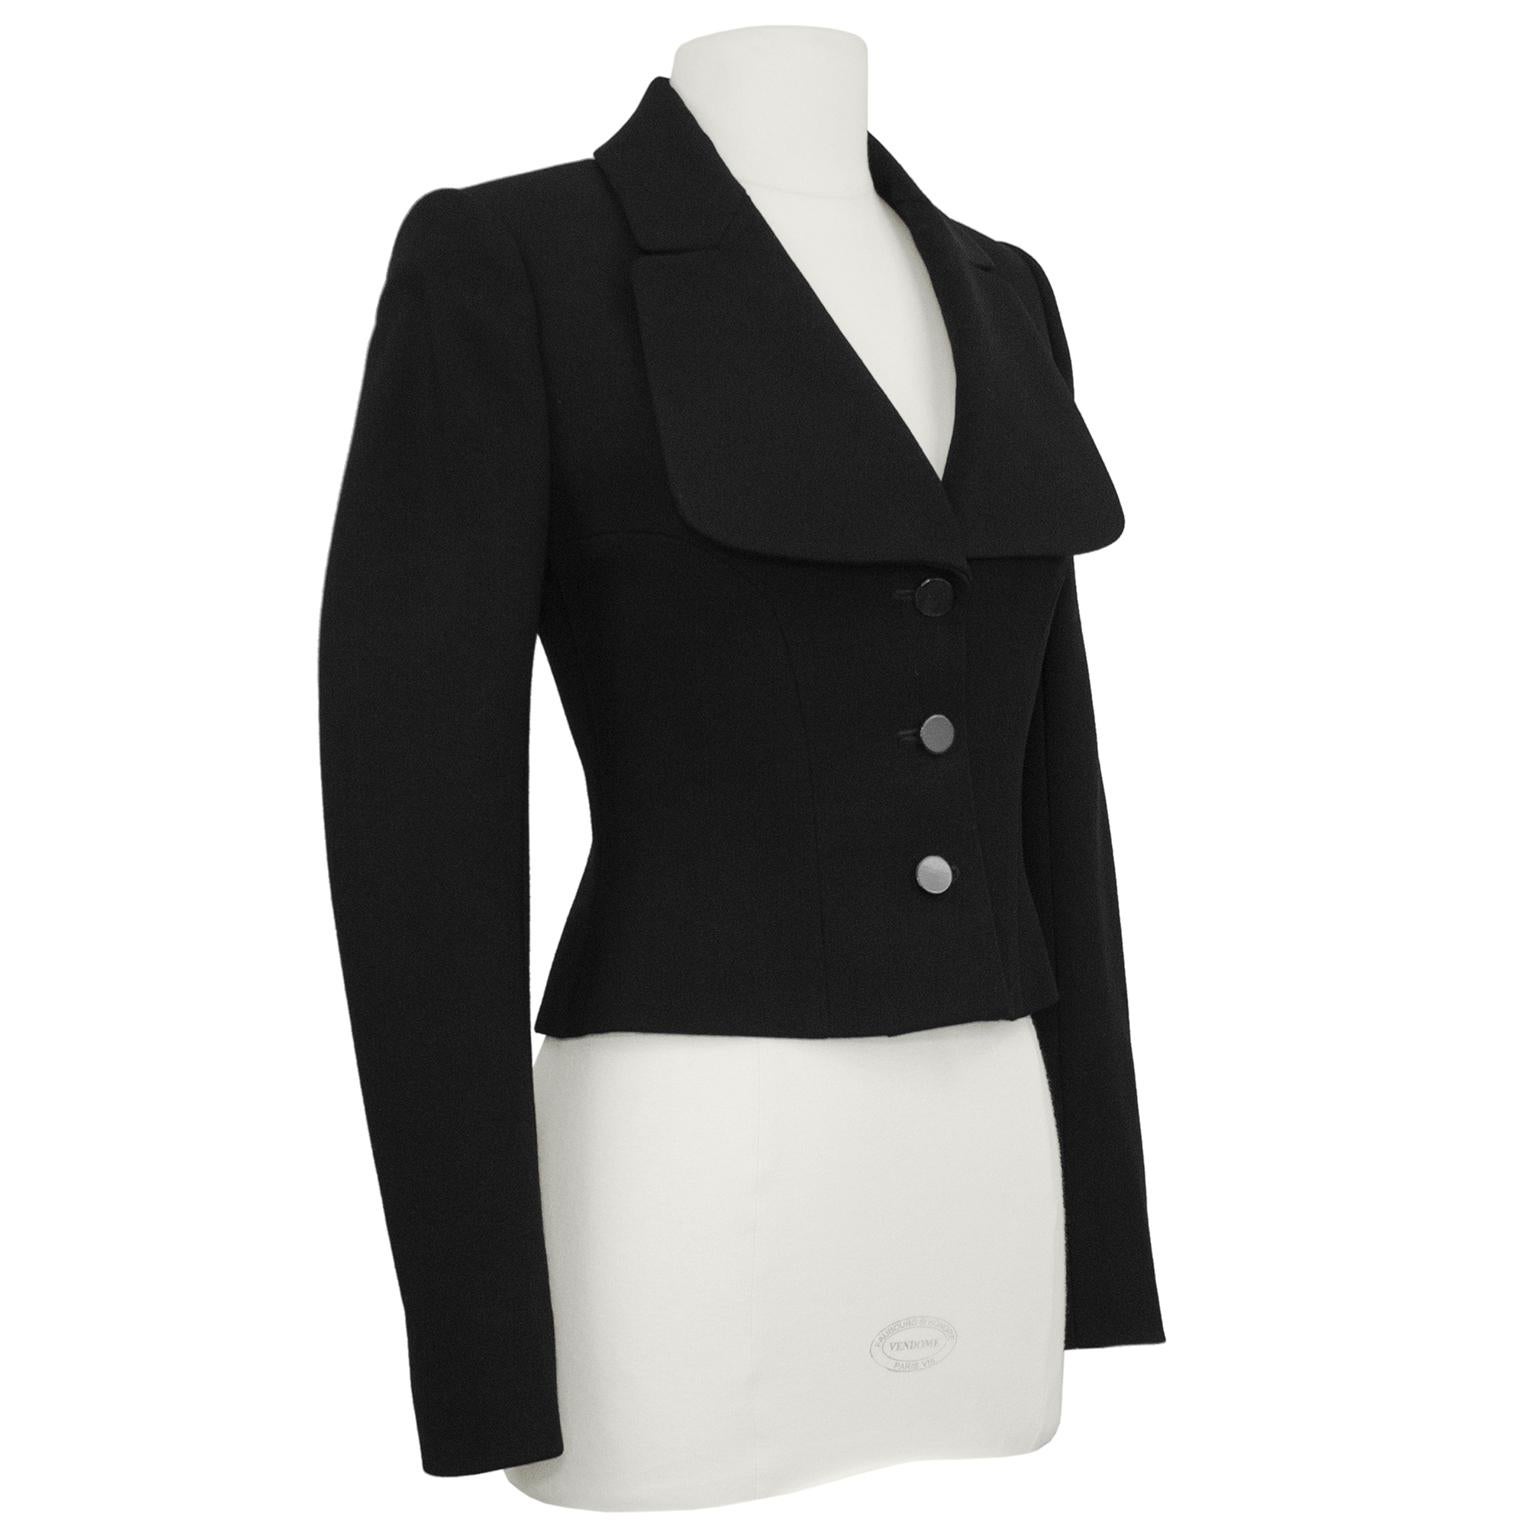 Azzedine Alaia blazer from the early 2000s. A very chic, cropped and fitted wool blazer. Long sleeves with an oversized and rounded collar that creates a deep v neckline. Three dark grey tortoise shell plastic buttons. Black poly lining. Azzedine